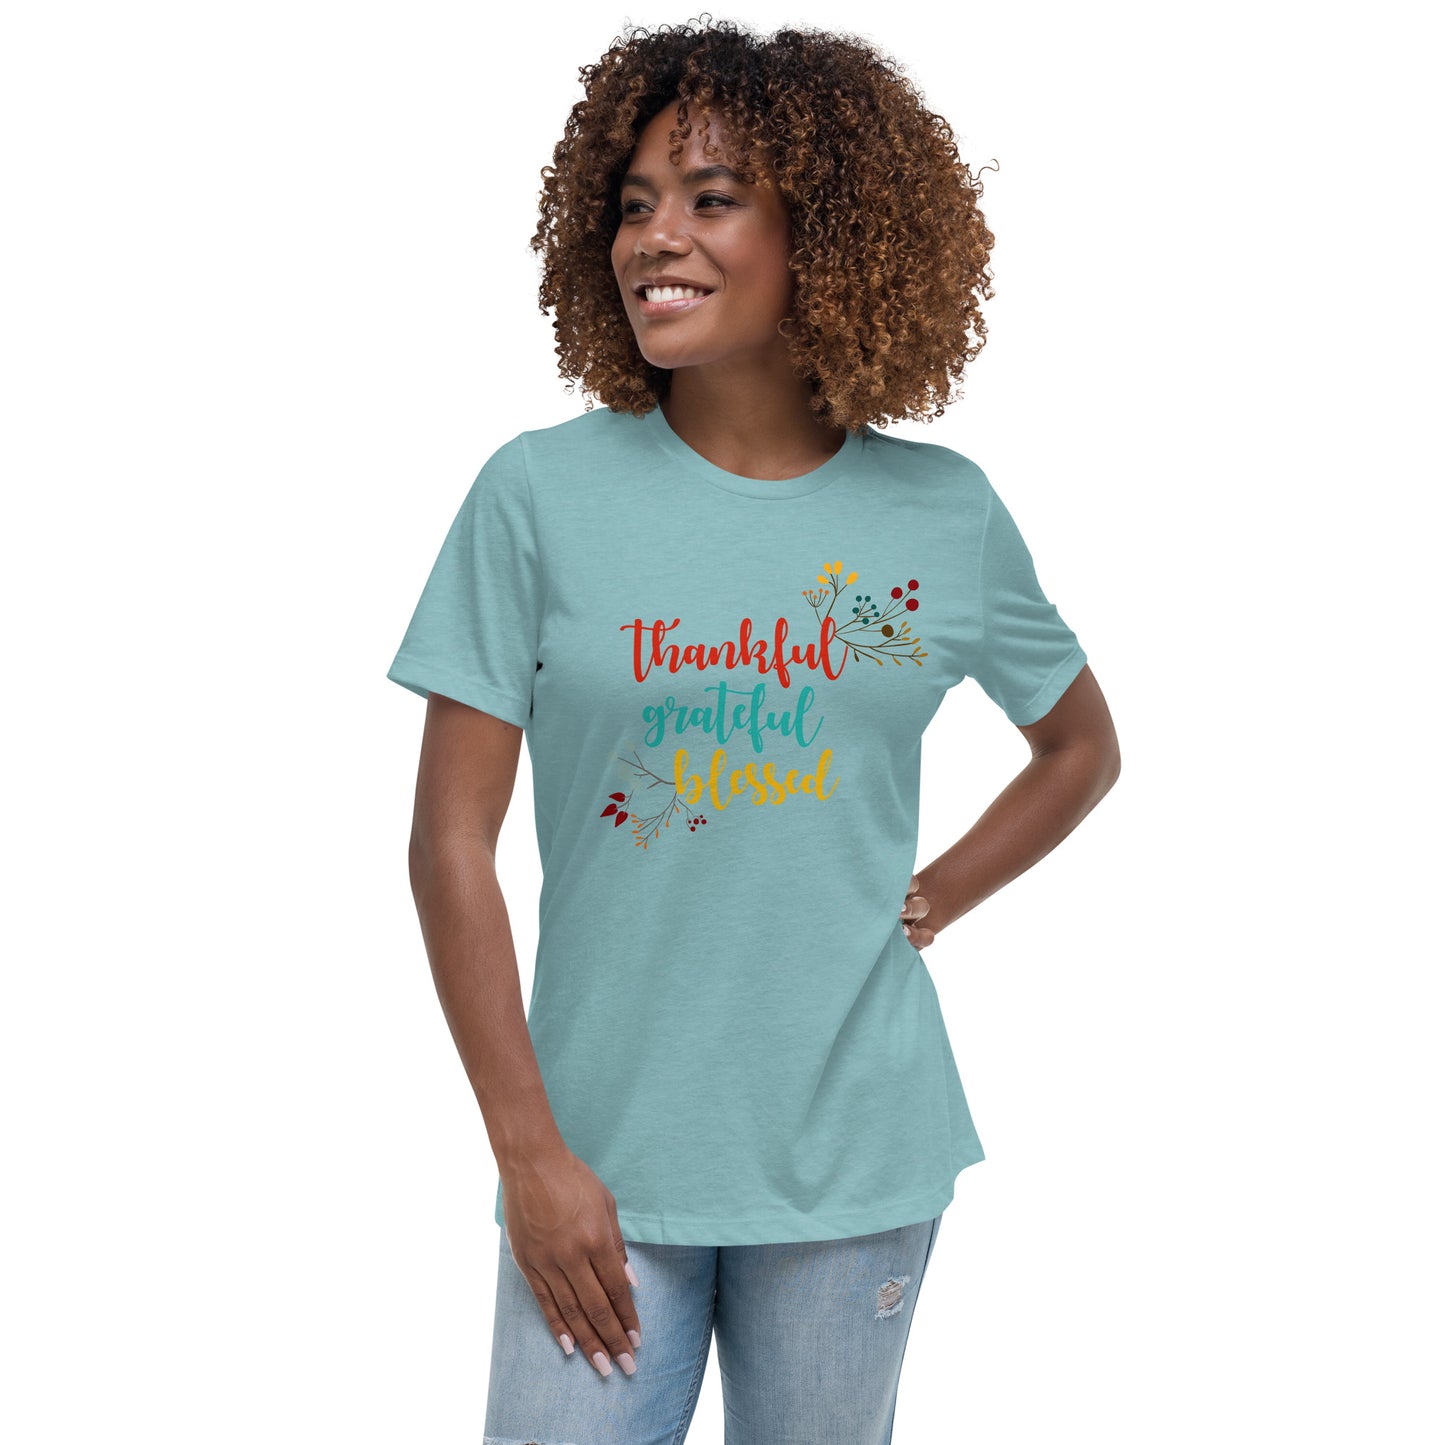 Thankful Grateful Blessed Women's Relaxed T-Shirt